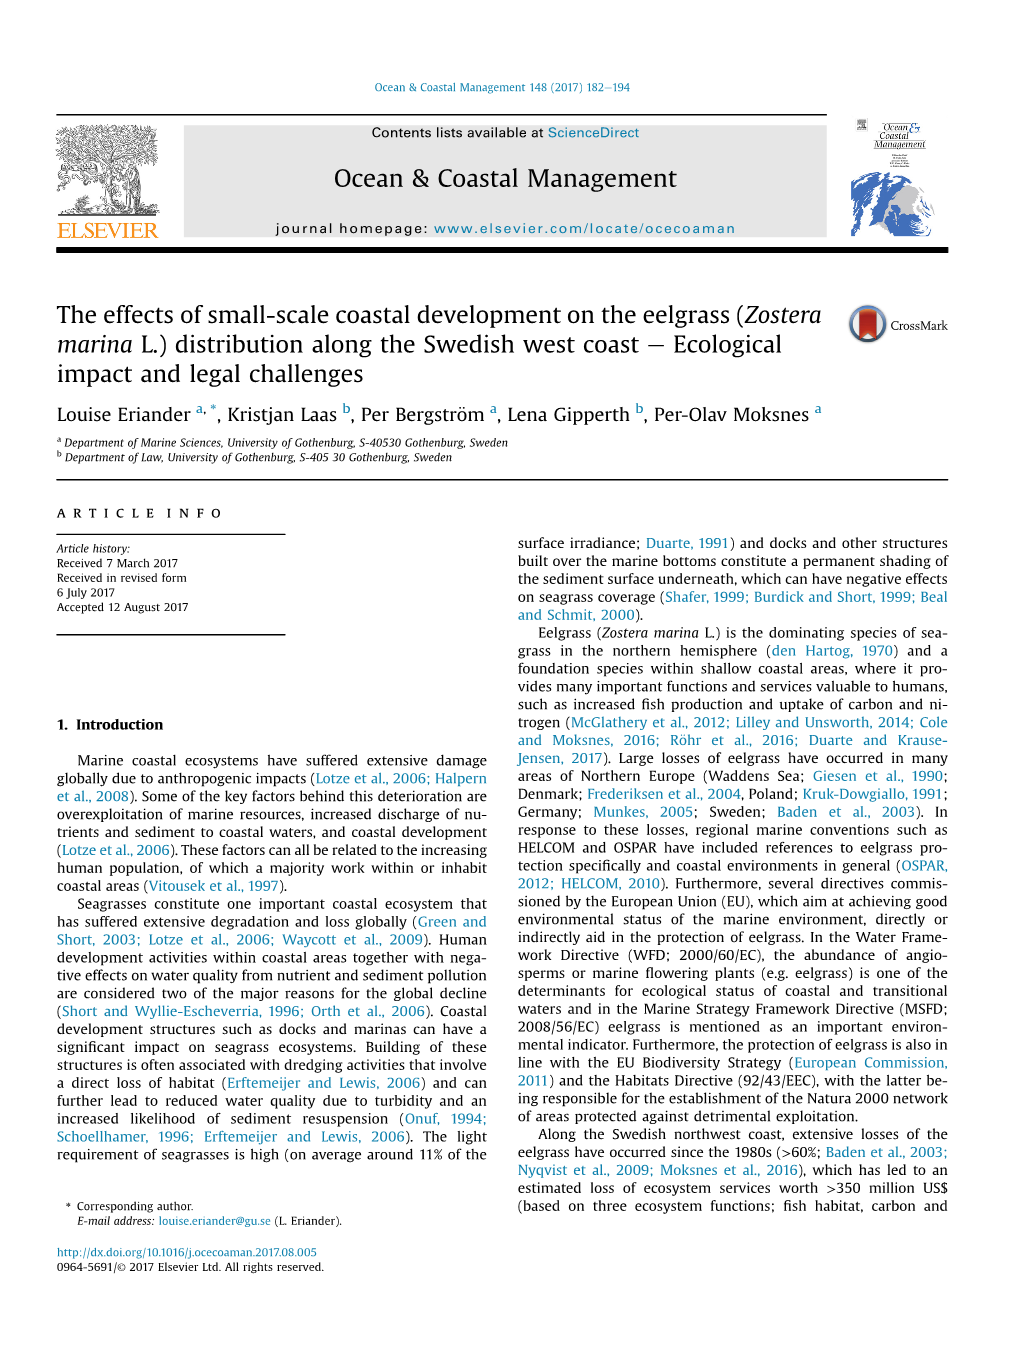 Zostera Marina L.) Distribution Along the Swedish West Coast E Ecological Impact and Legal Challenges